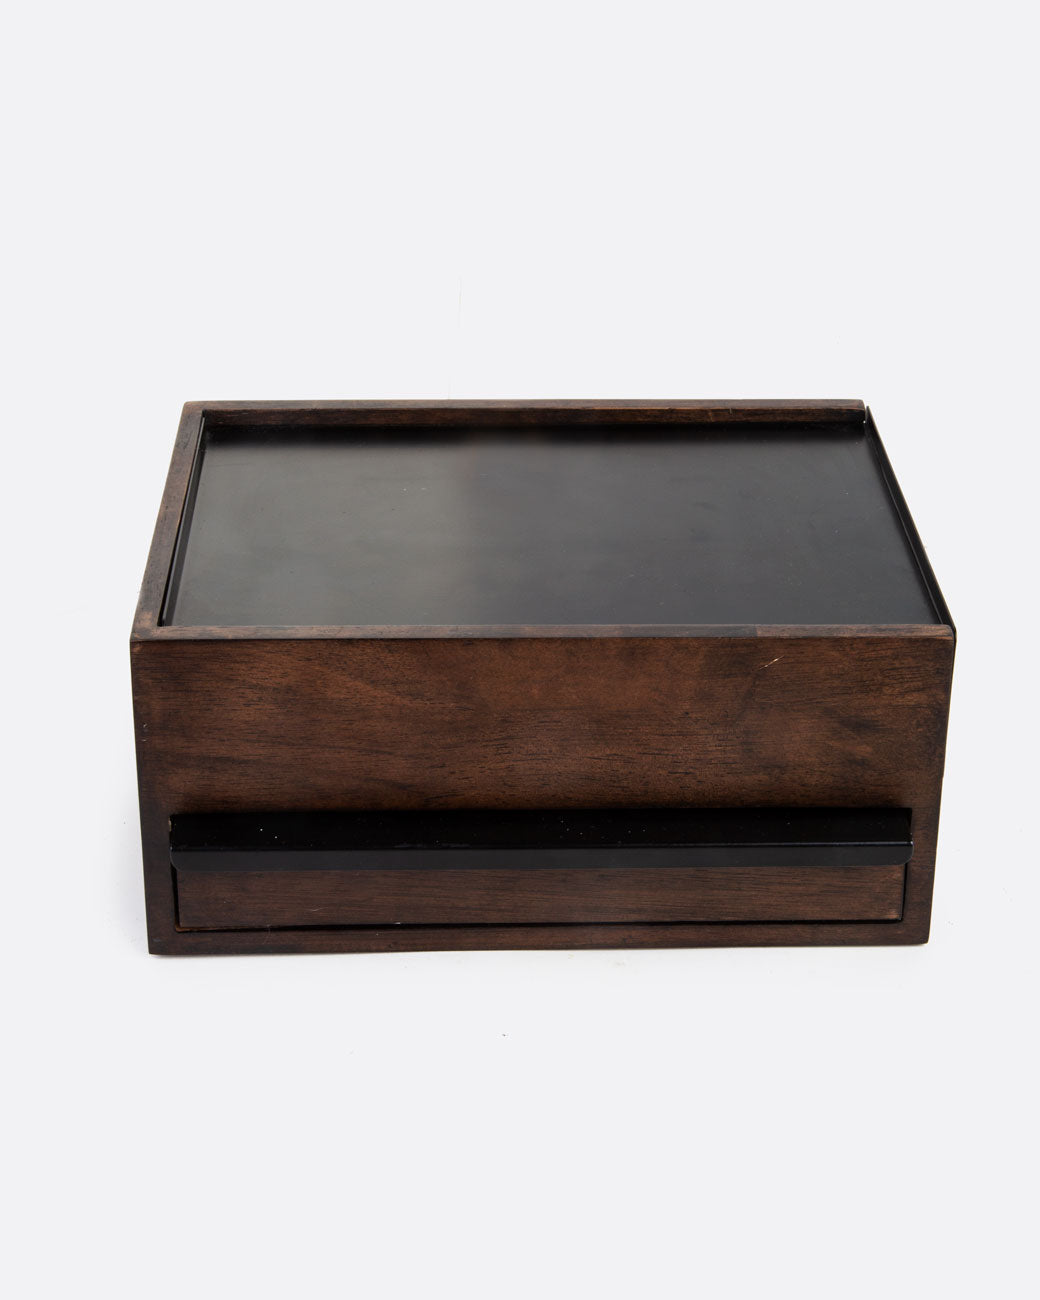 jewelry box made of wood with metal details. there are three compartments, one with rings and two drawers.